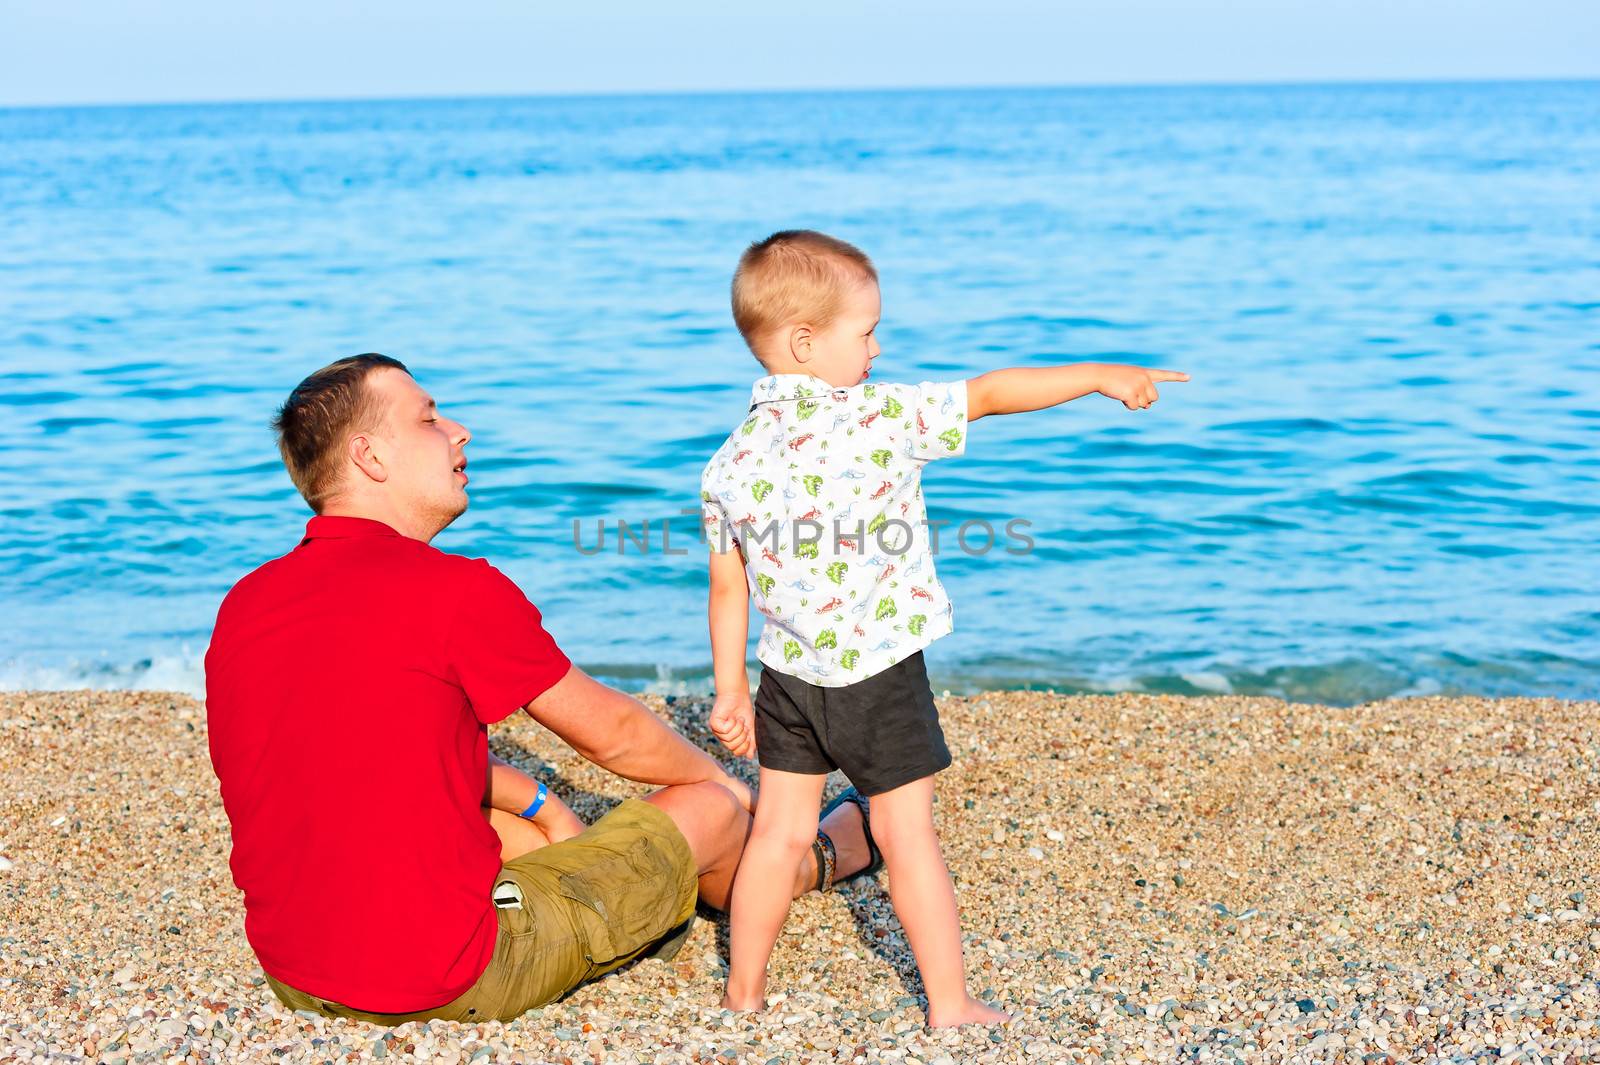 son standing next to his father, and that it shows him in the sea